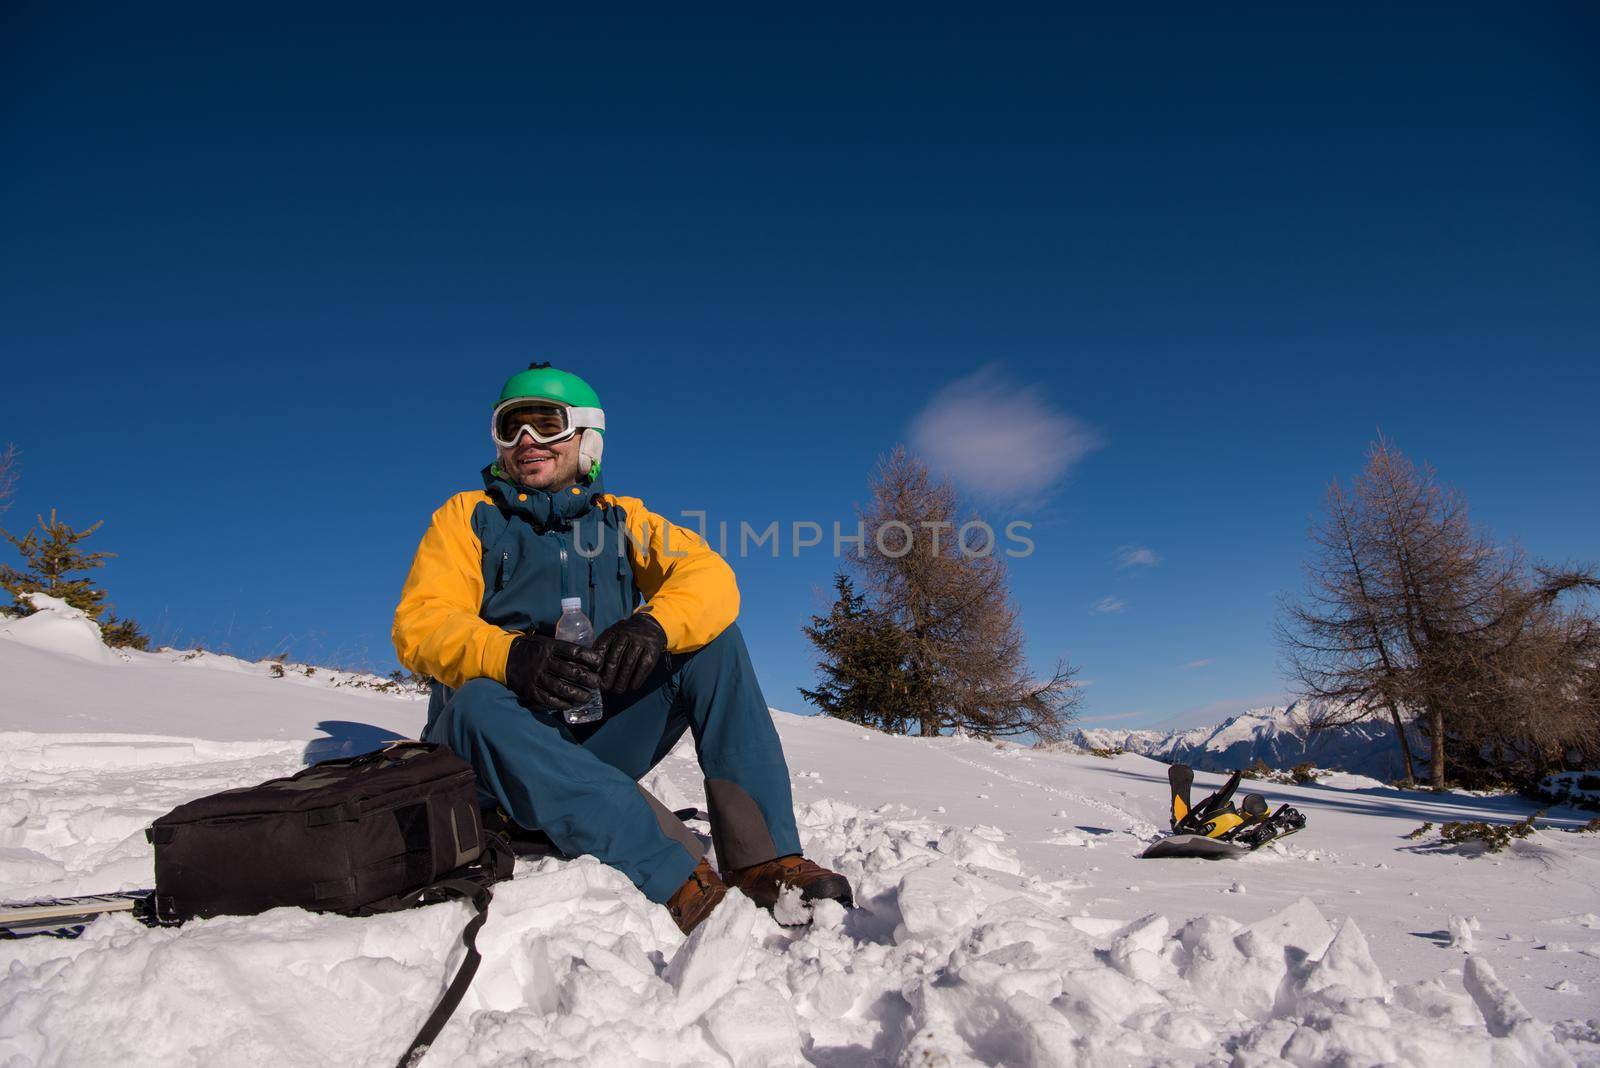 snowboarder relaxing and posing at sunny day on winter season with blue sky in background